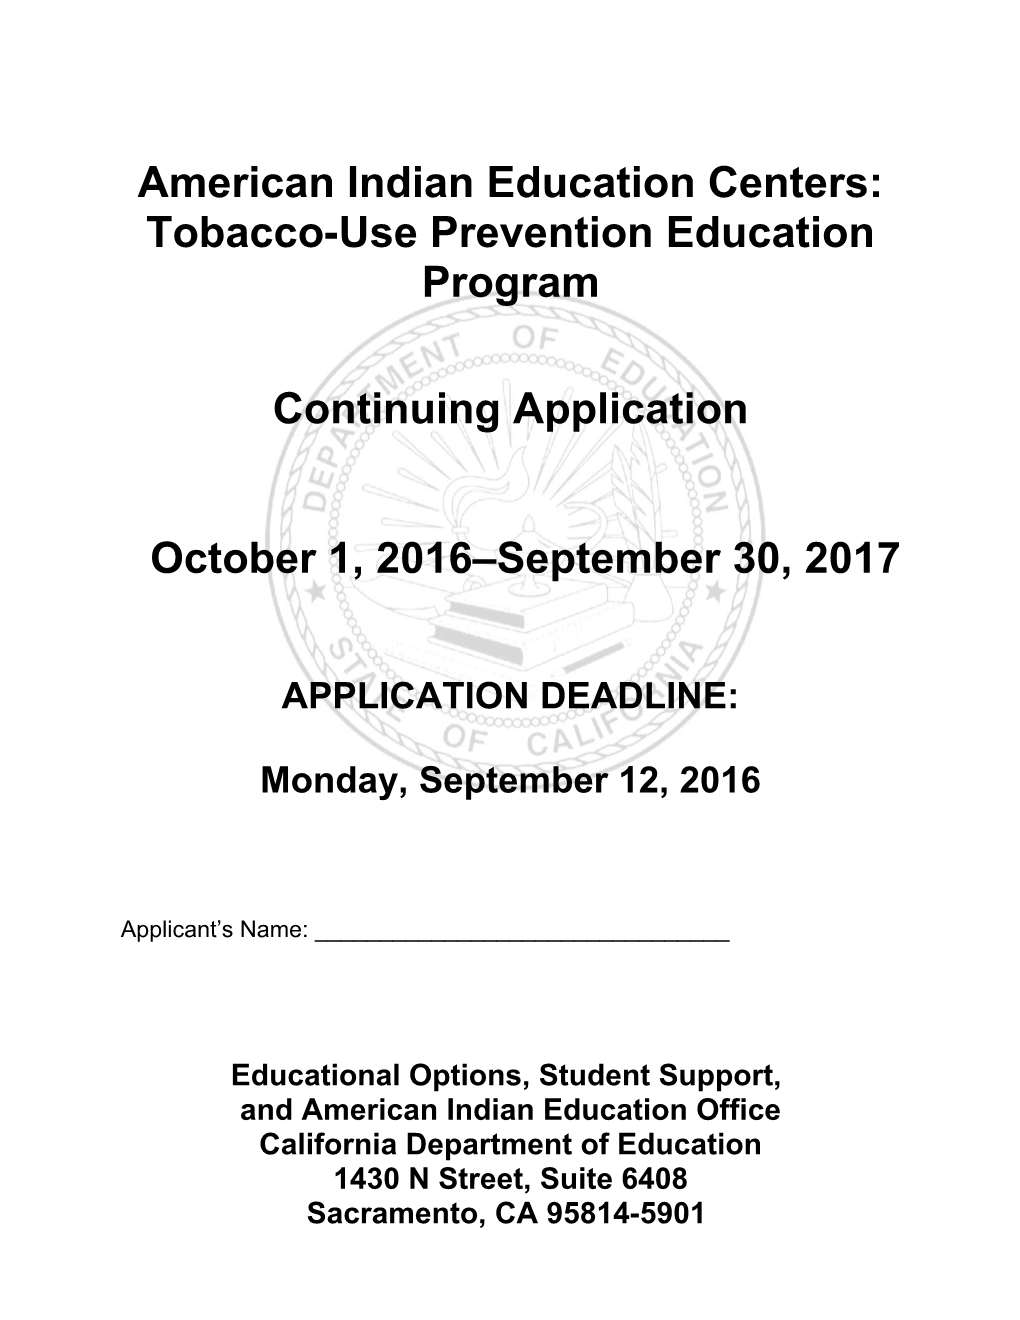 RFA-16: AIEC TUPE Continuing Application (CA Dept of Education)